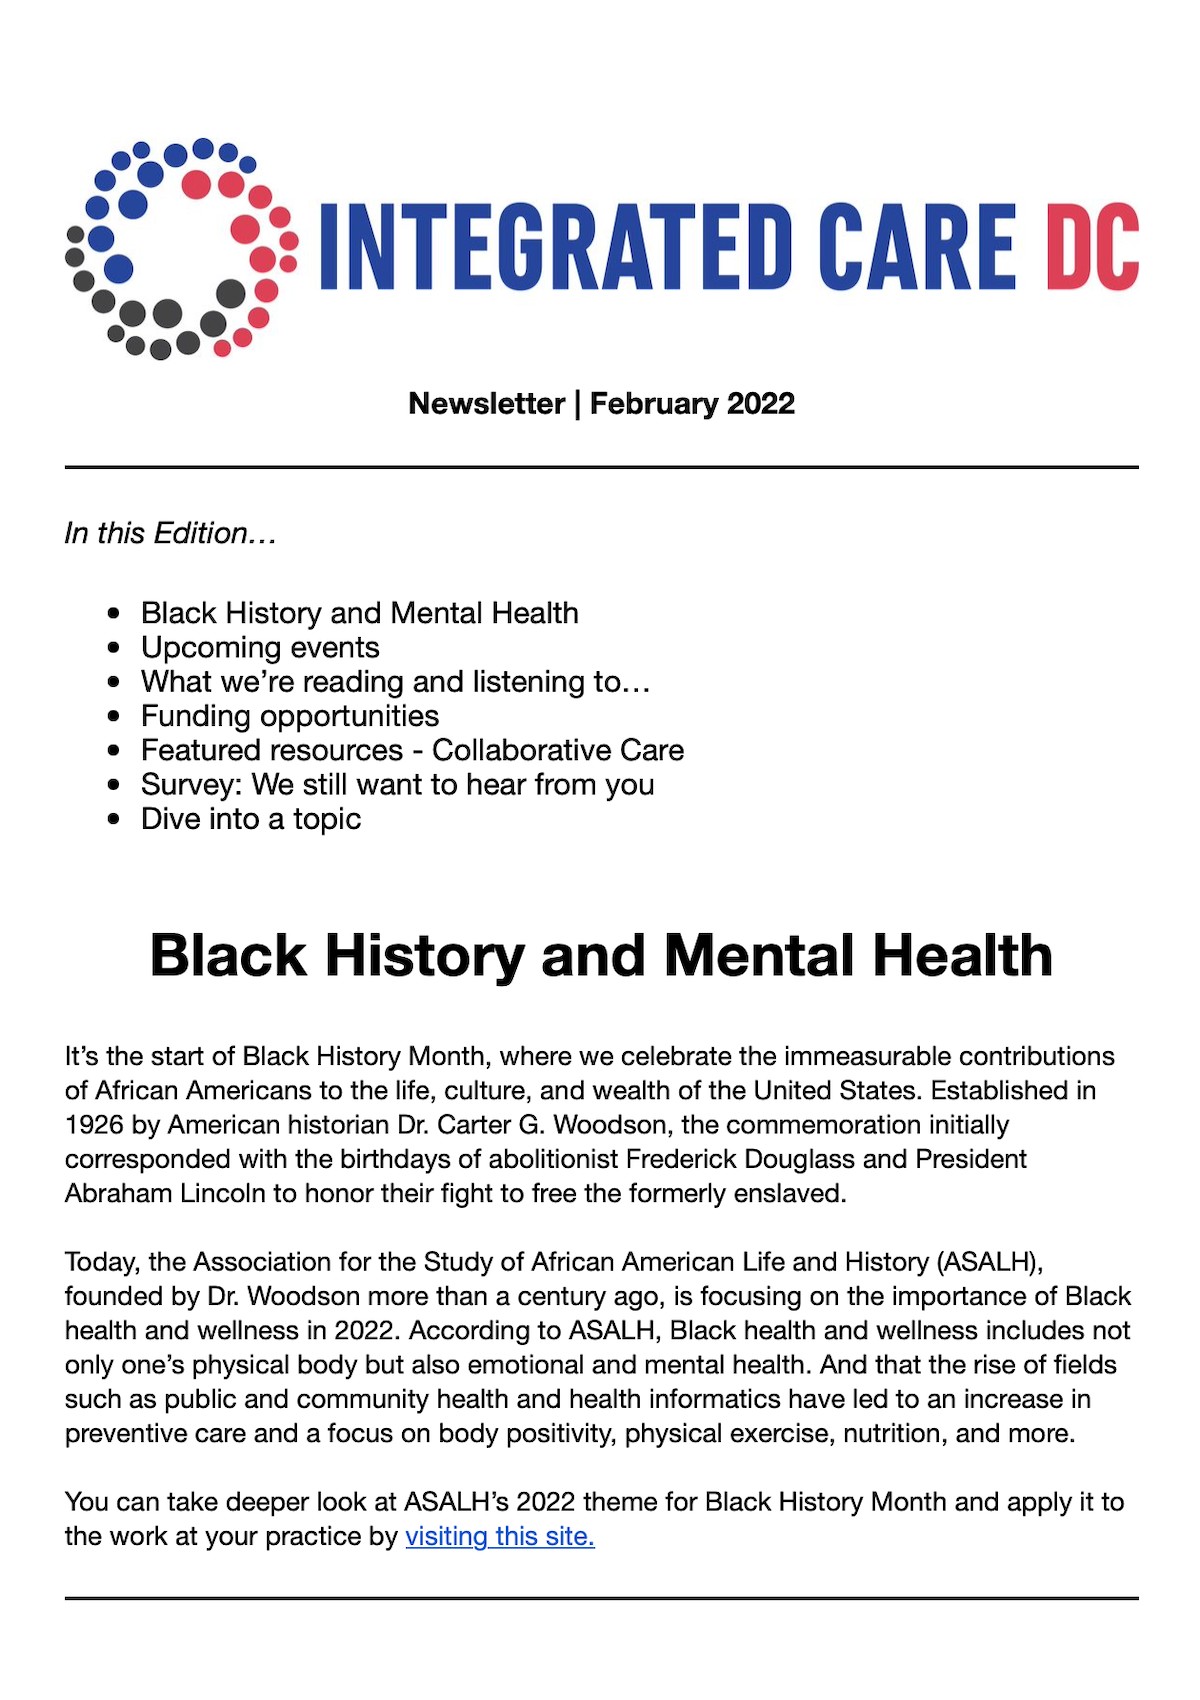 Integrated Care DC January 2 Newsletter Image